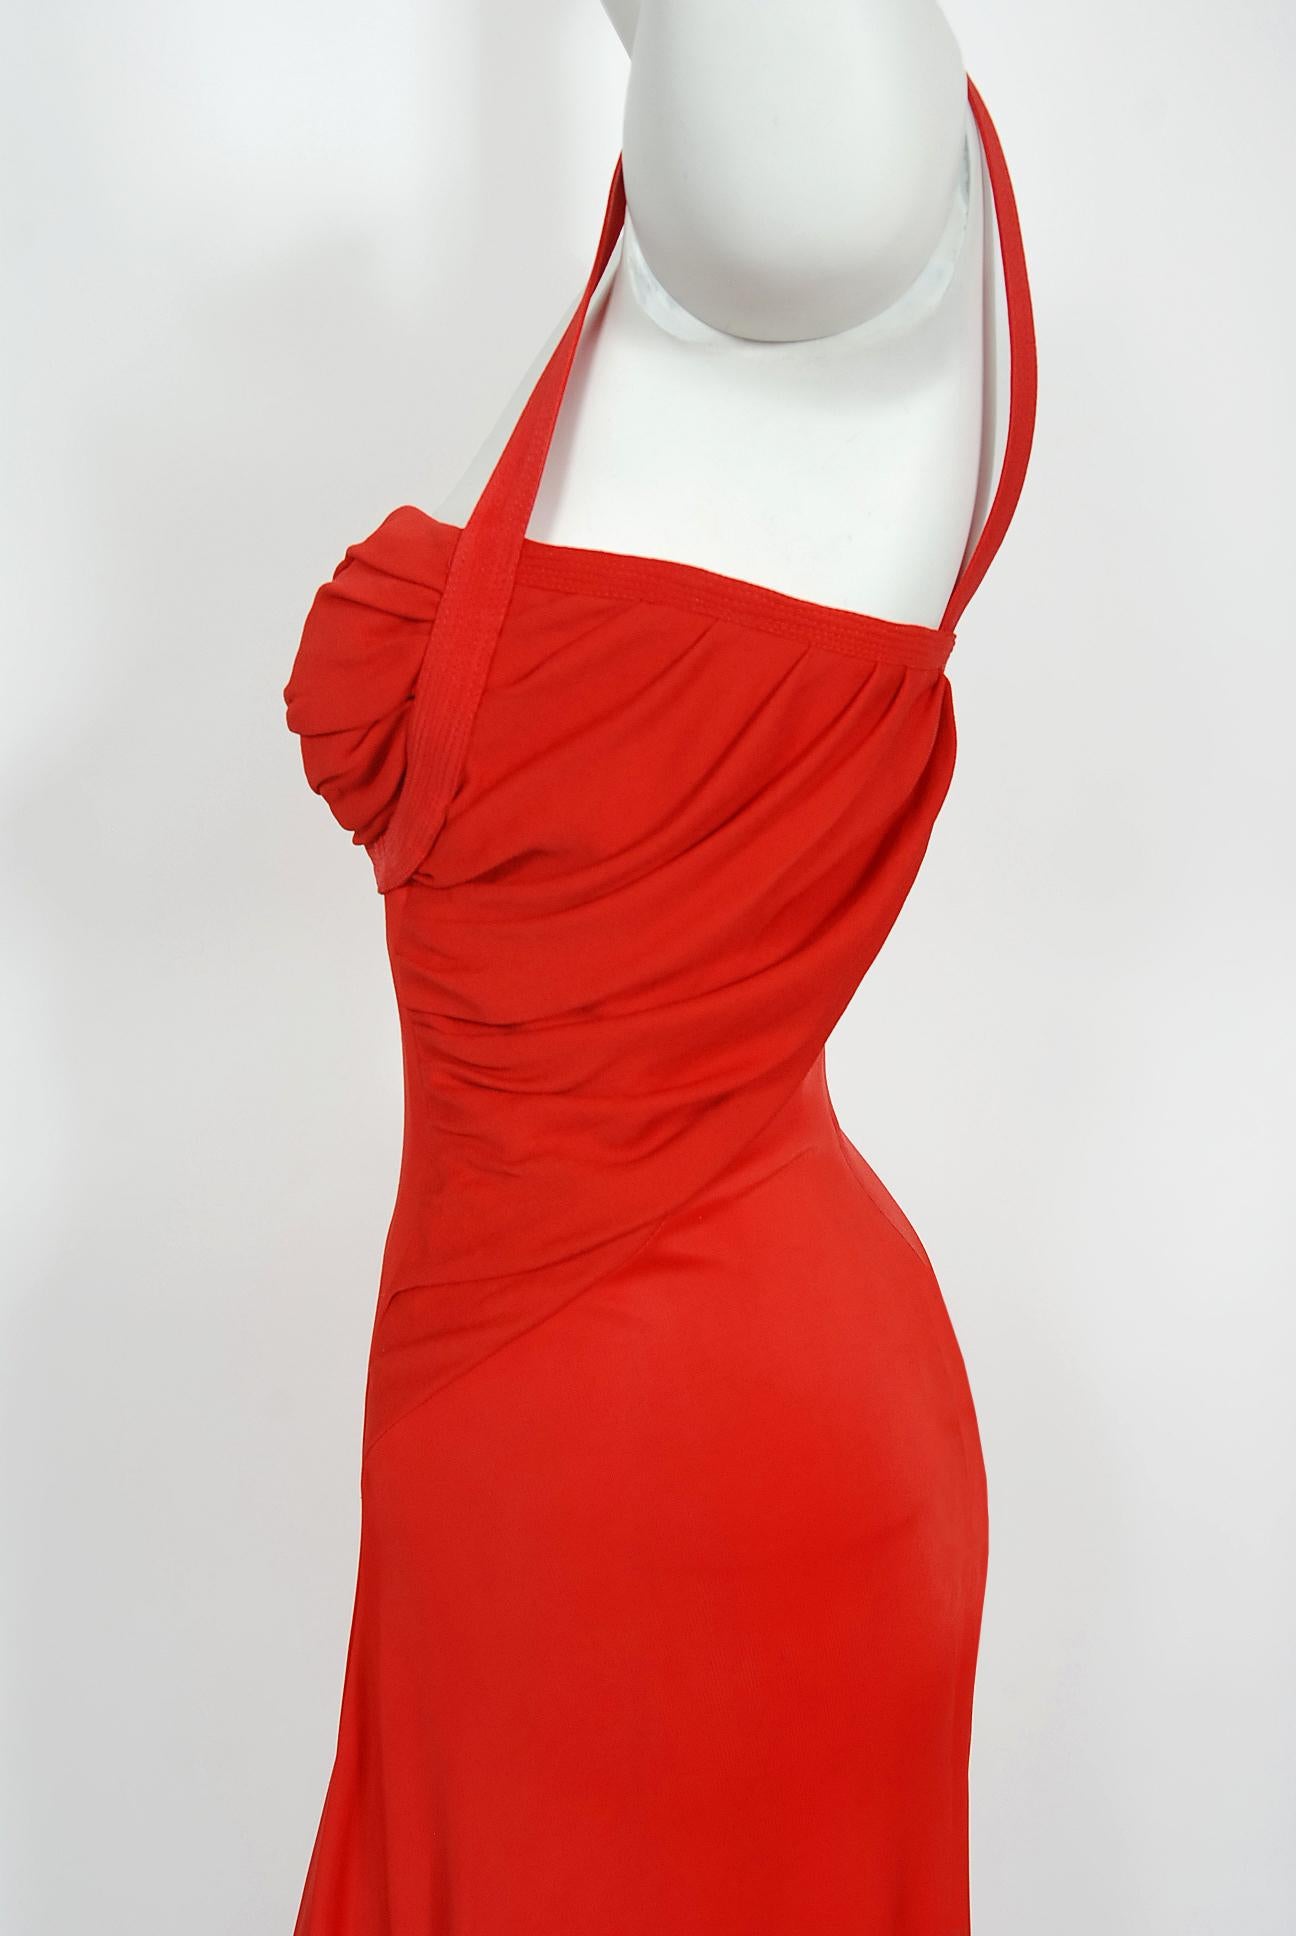 Vintage 1993 Gianni Versace Couture Documented Red Silk Bustier High-Slits Gown 9